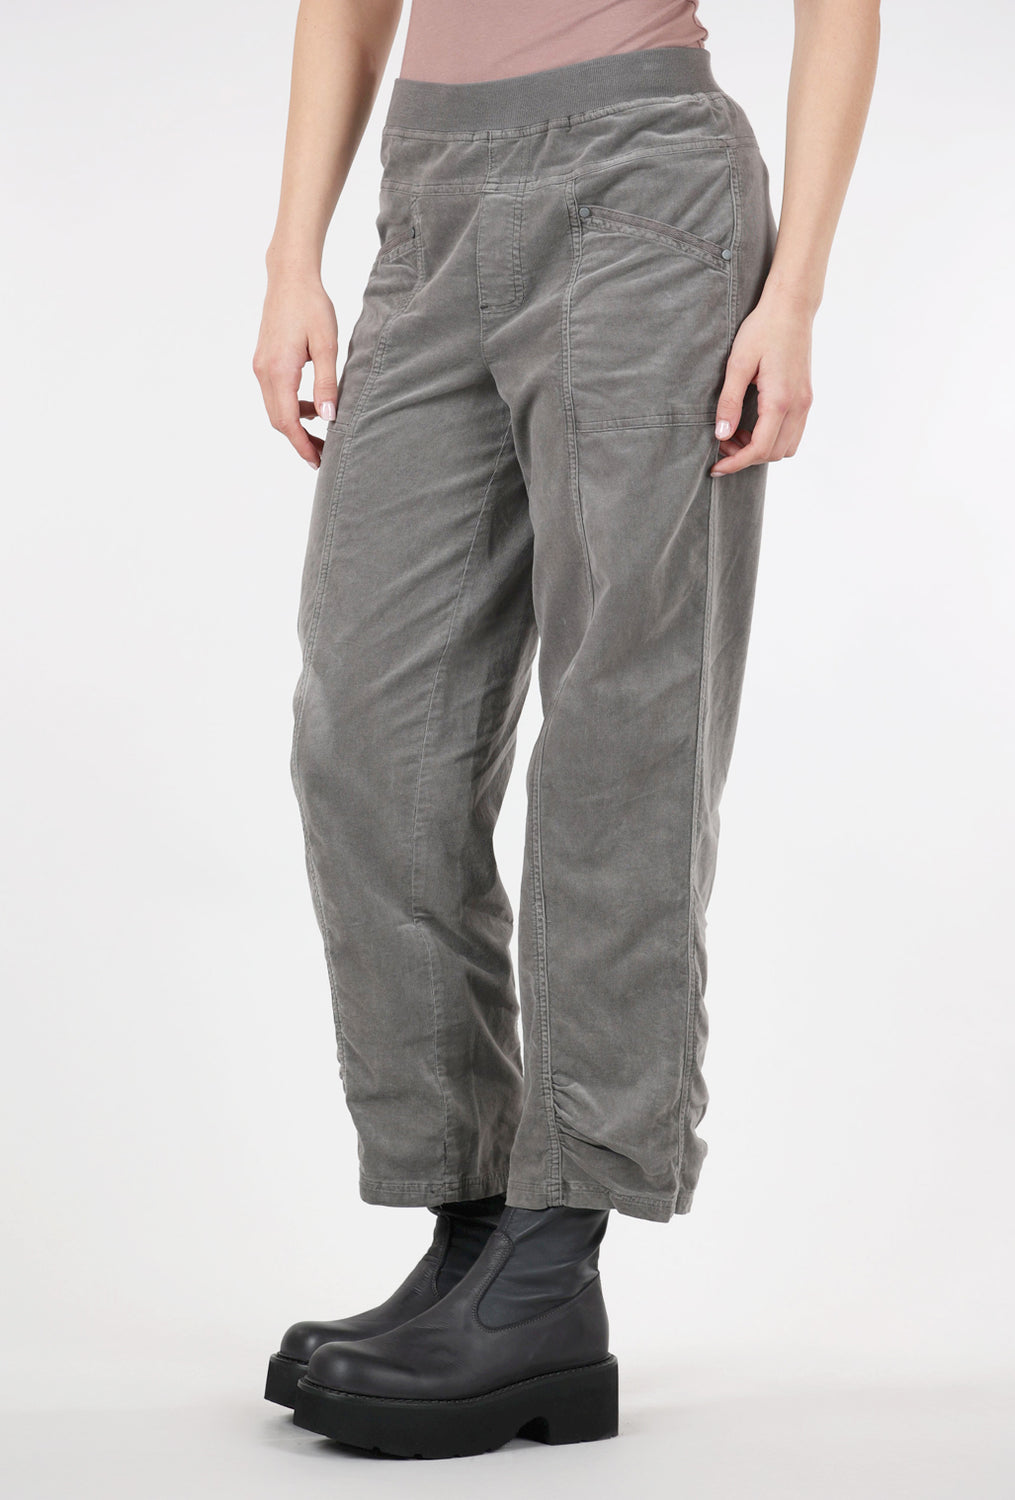 Stretch Cord Ruched Flood Pant, Earth